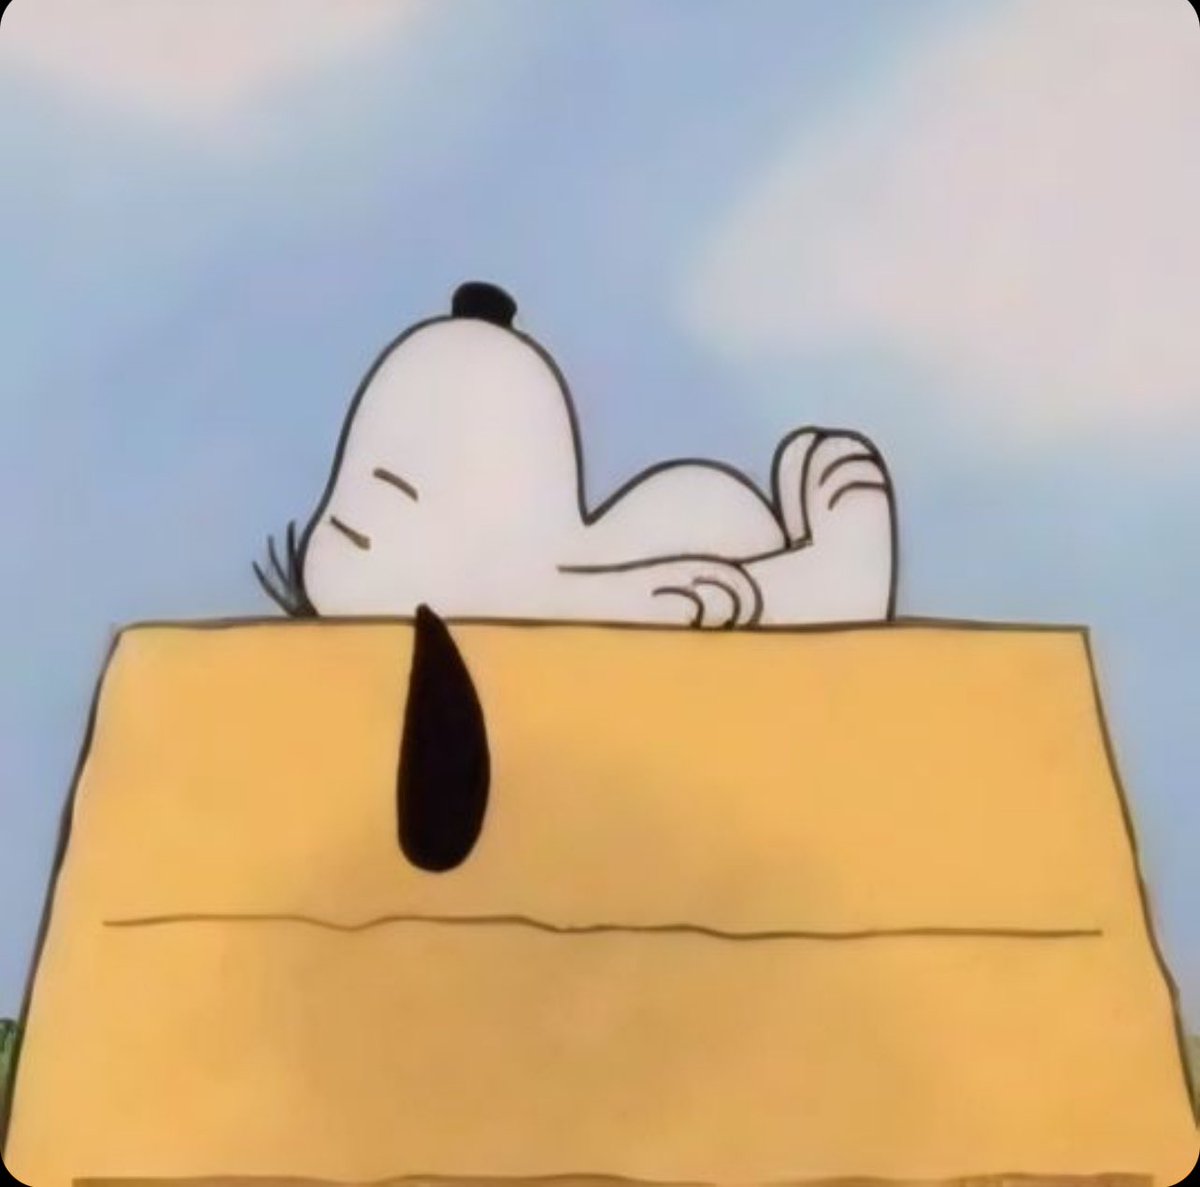 snoopy image of the day